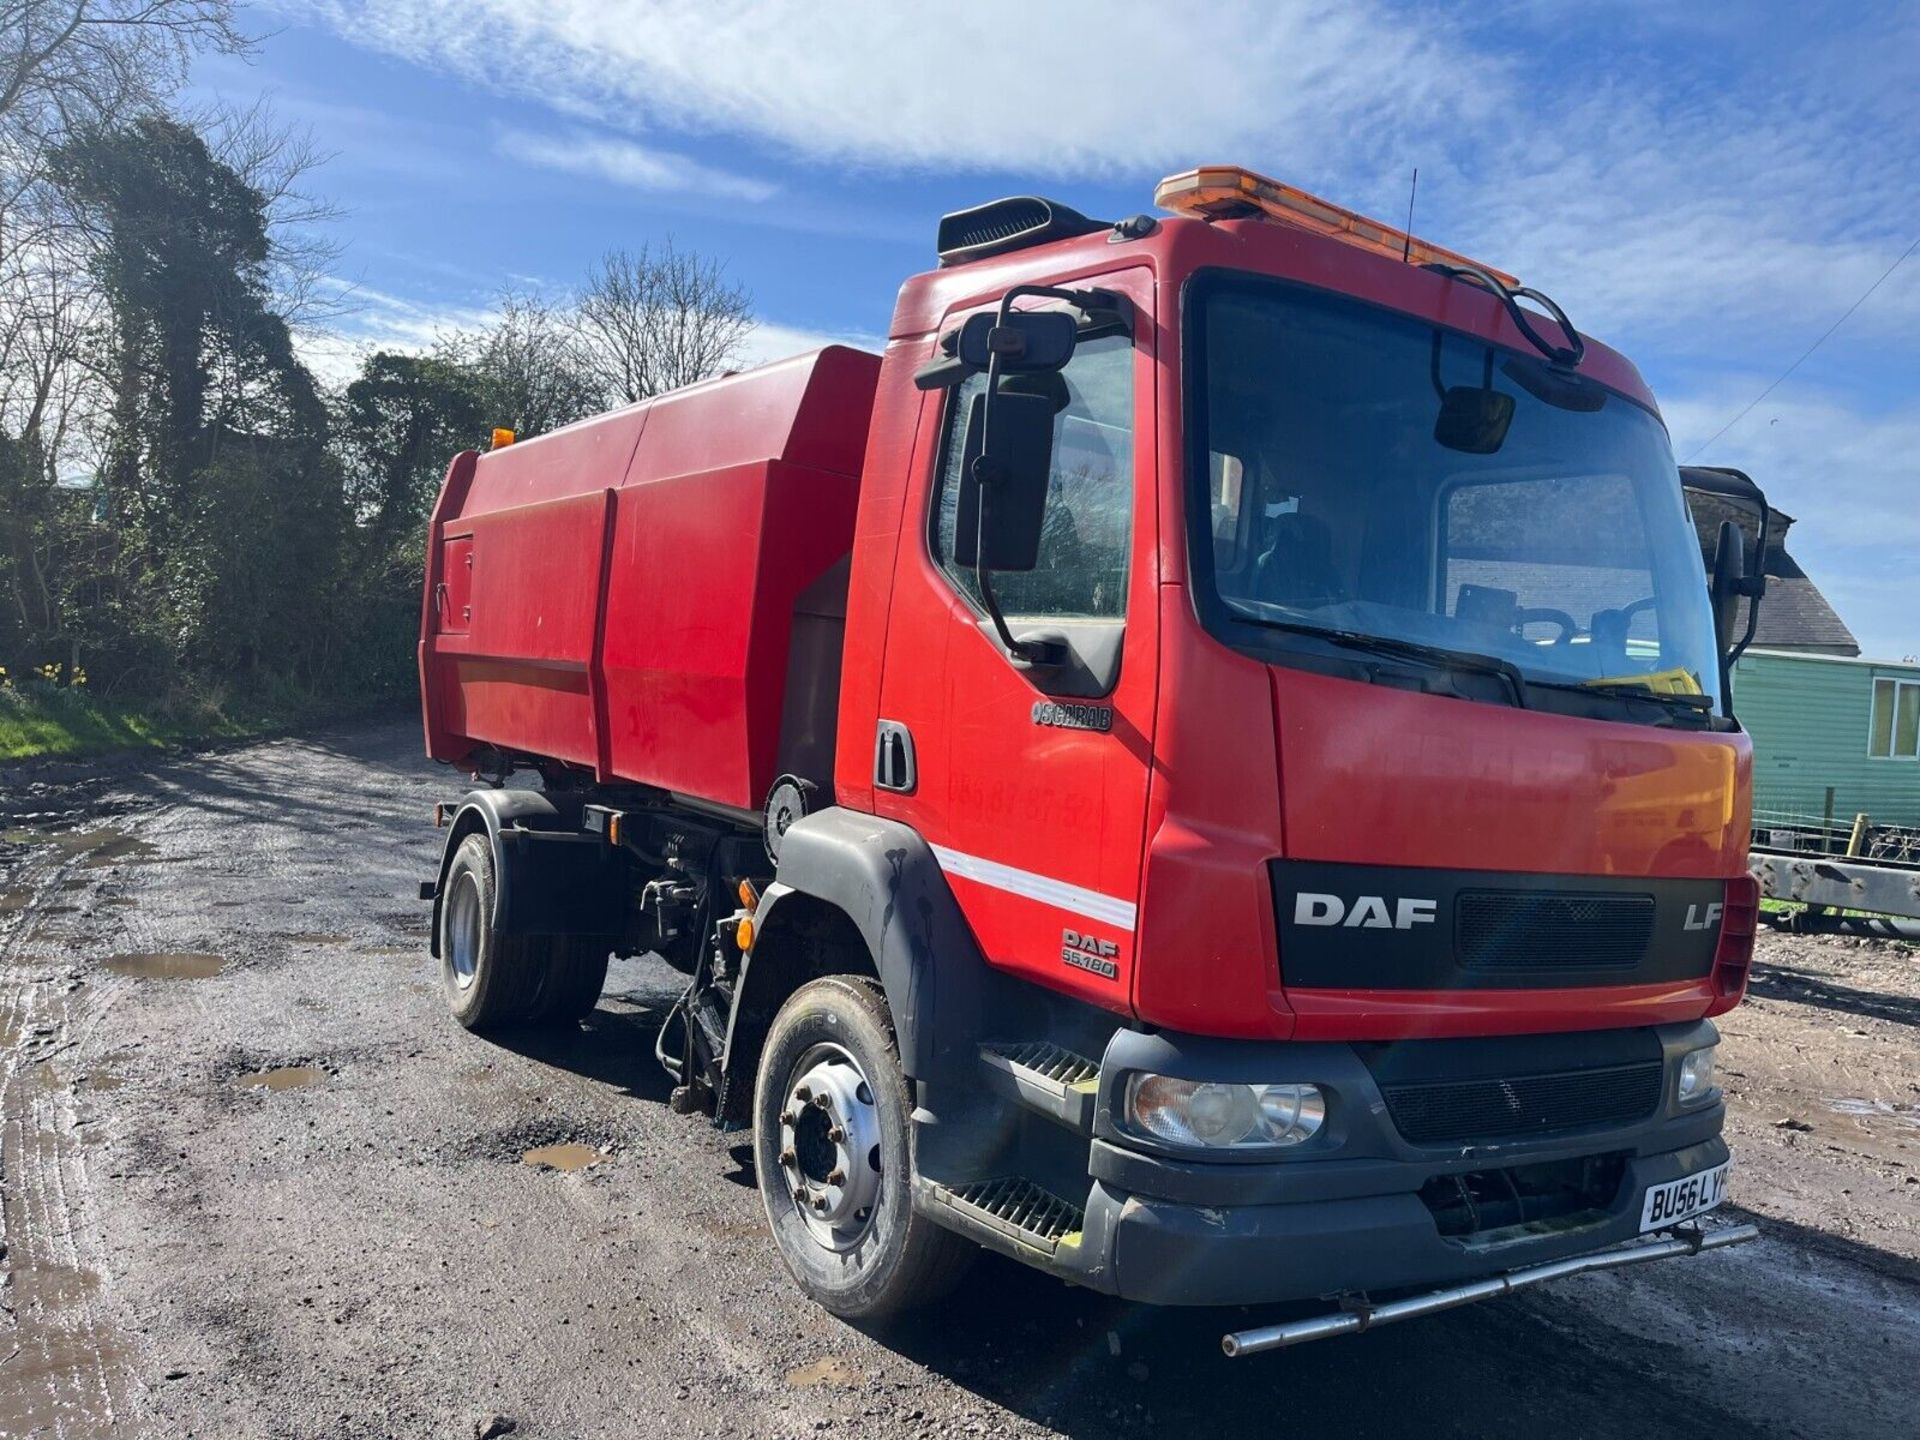 2007 DAF LF55 180 LEFT HAND DRIVE ROAD SWEEPER - Image 19 of 19